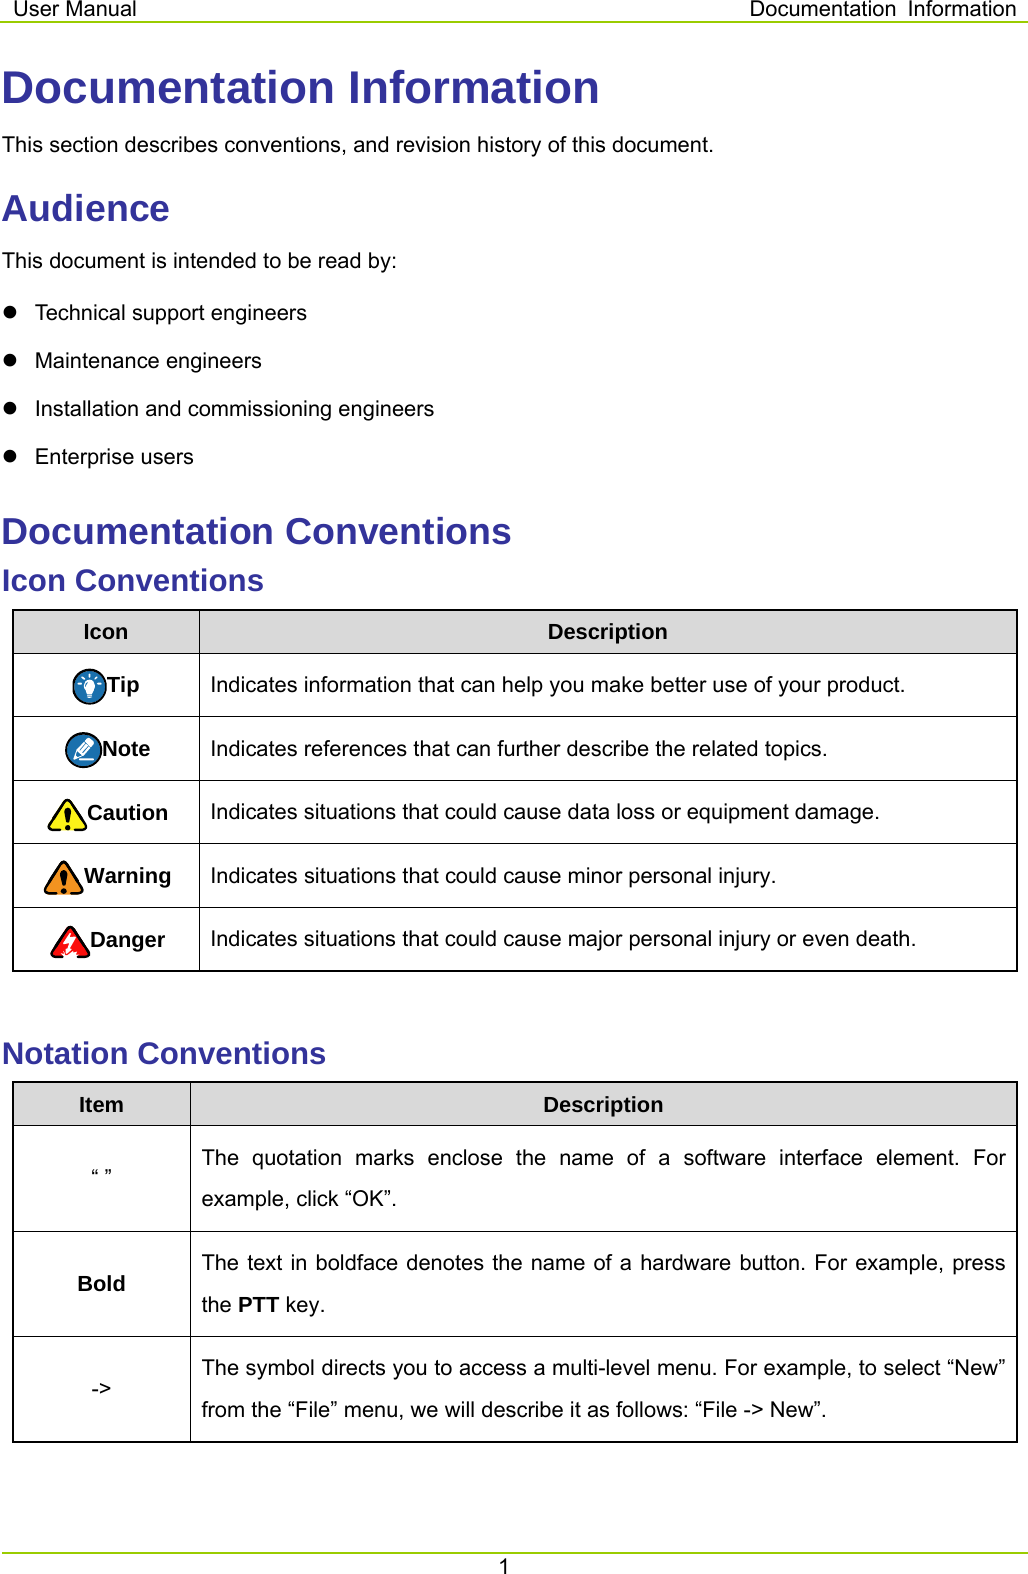 User Manual  Documentation  Information 1  Documentation Information This section describes conventions, and revision history of this document. Audience This document is intended to be read by:     Technical support engineers  Maintenance engineers   Installation and commissioning engineers  Enterprise users Documentation Conventions Icon Conventions Icon  Description Tip  Indicates information that can help you make better use of your product. Note  Indicates references that can further describe the related topics. Caution  Indicates situations that could cause data loss or equipment damage. Warning  Indicates situations that could cause minor personal injury. Danger  Indicates situations that could cause major personal injury or even death.  Notation Conventions Item  Description “ ” The quotation marks enclose the name of a software interface element. For example, click “OK”. Bold  The text in boldface denotes the name of a hardware button. For example, press the PTT key.   -&gt; The symbol directs you to access a multi-level menu. For example, to select “New” from the “File” menu, we will describe it as follows: “File -&gt; New”.  